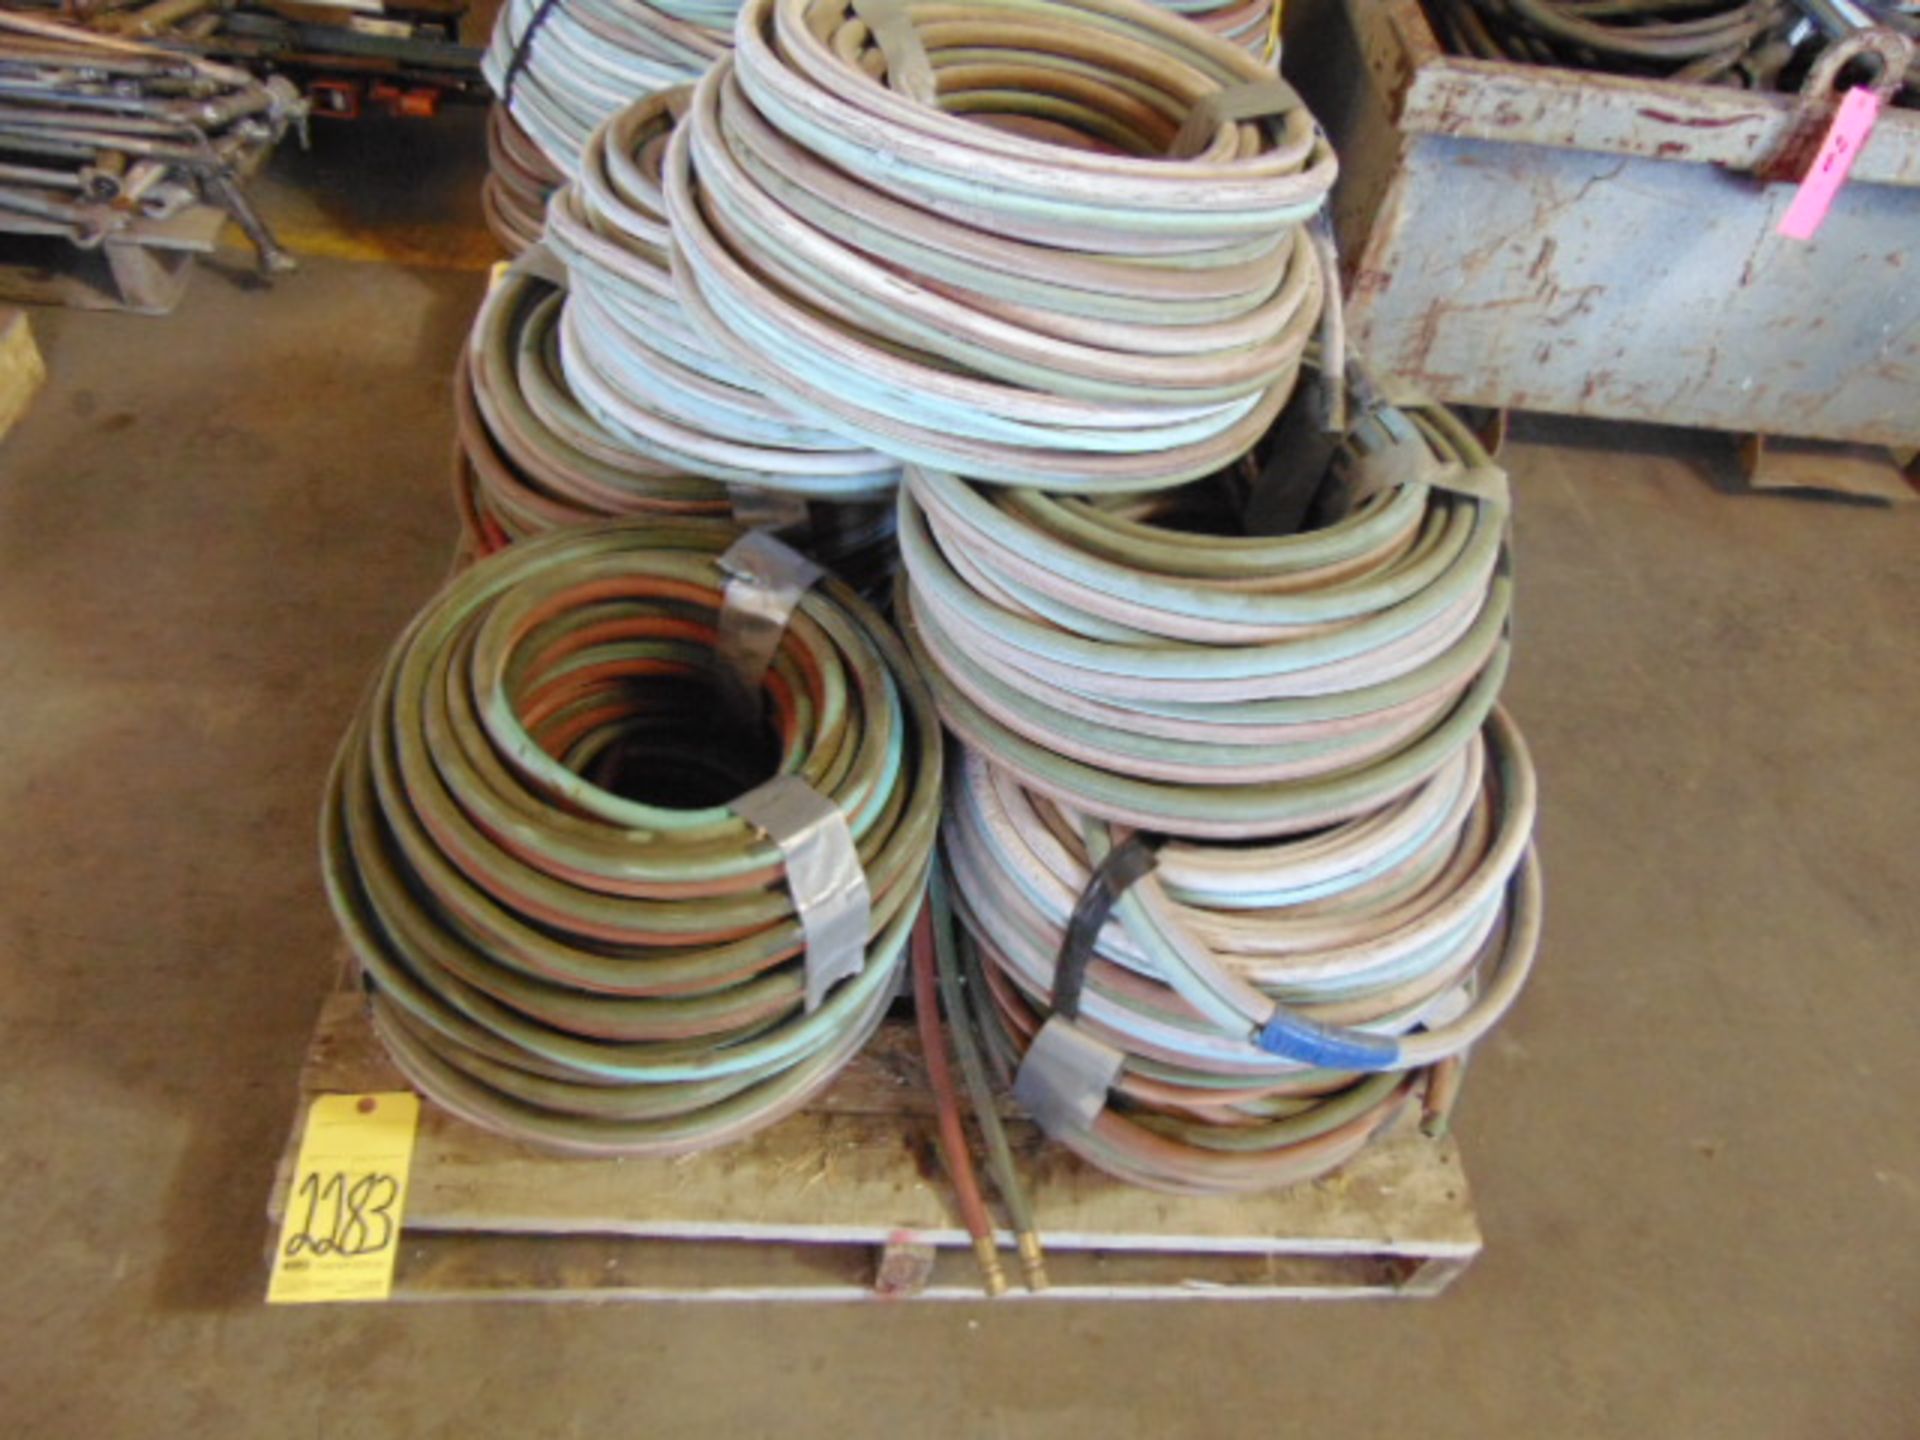 LOT OF TORCH HOSES (on one skid)